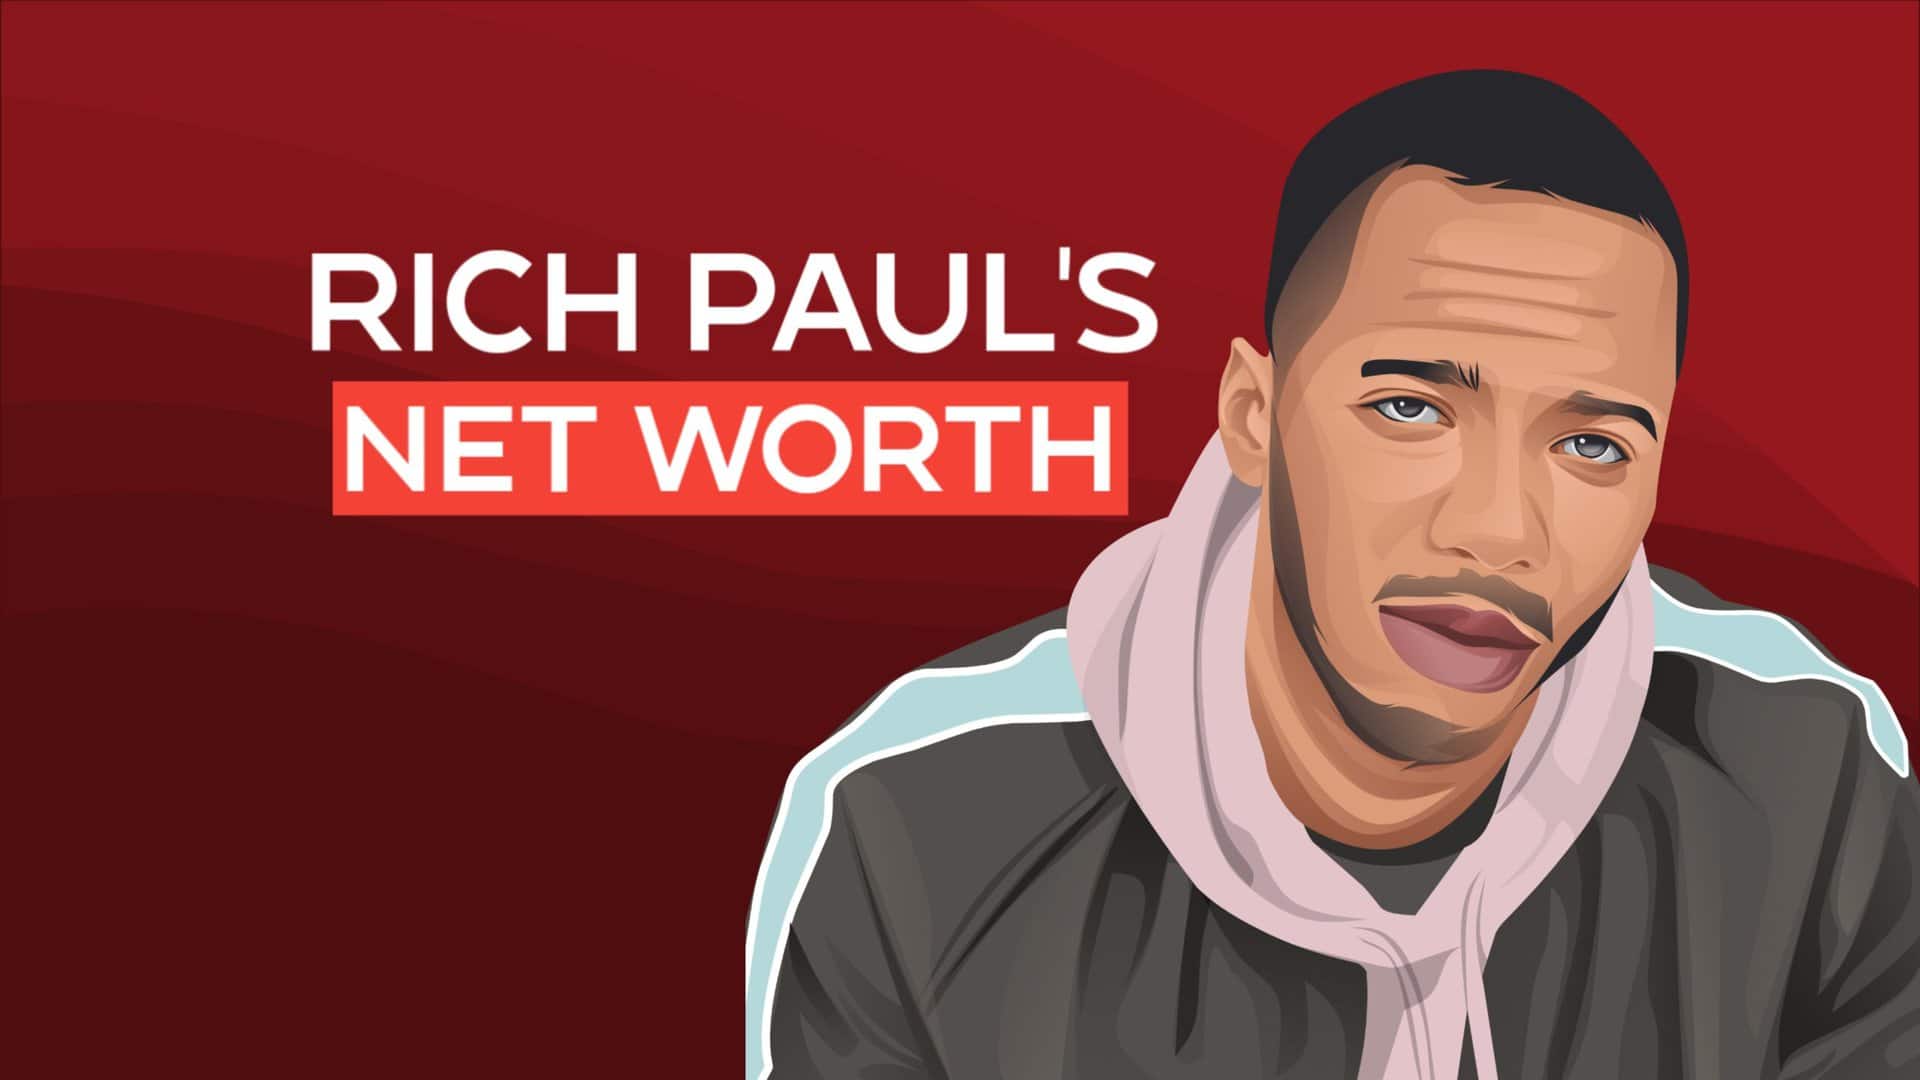 Rich Paul's Net Worth and Inspiring Story